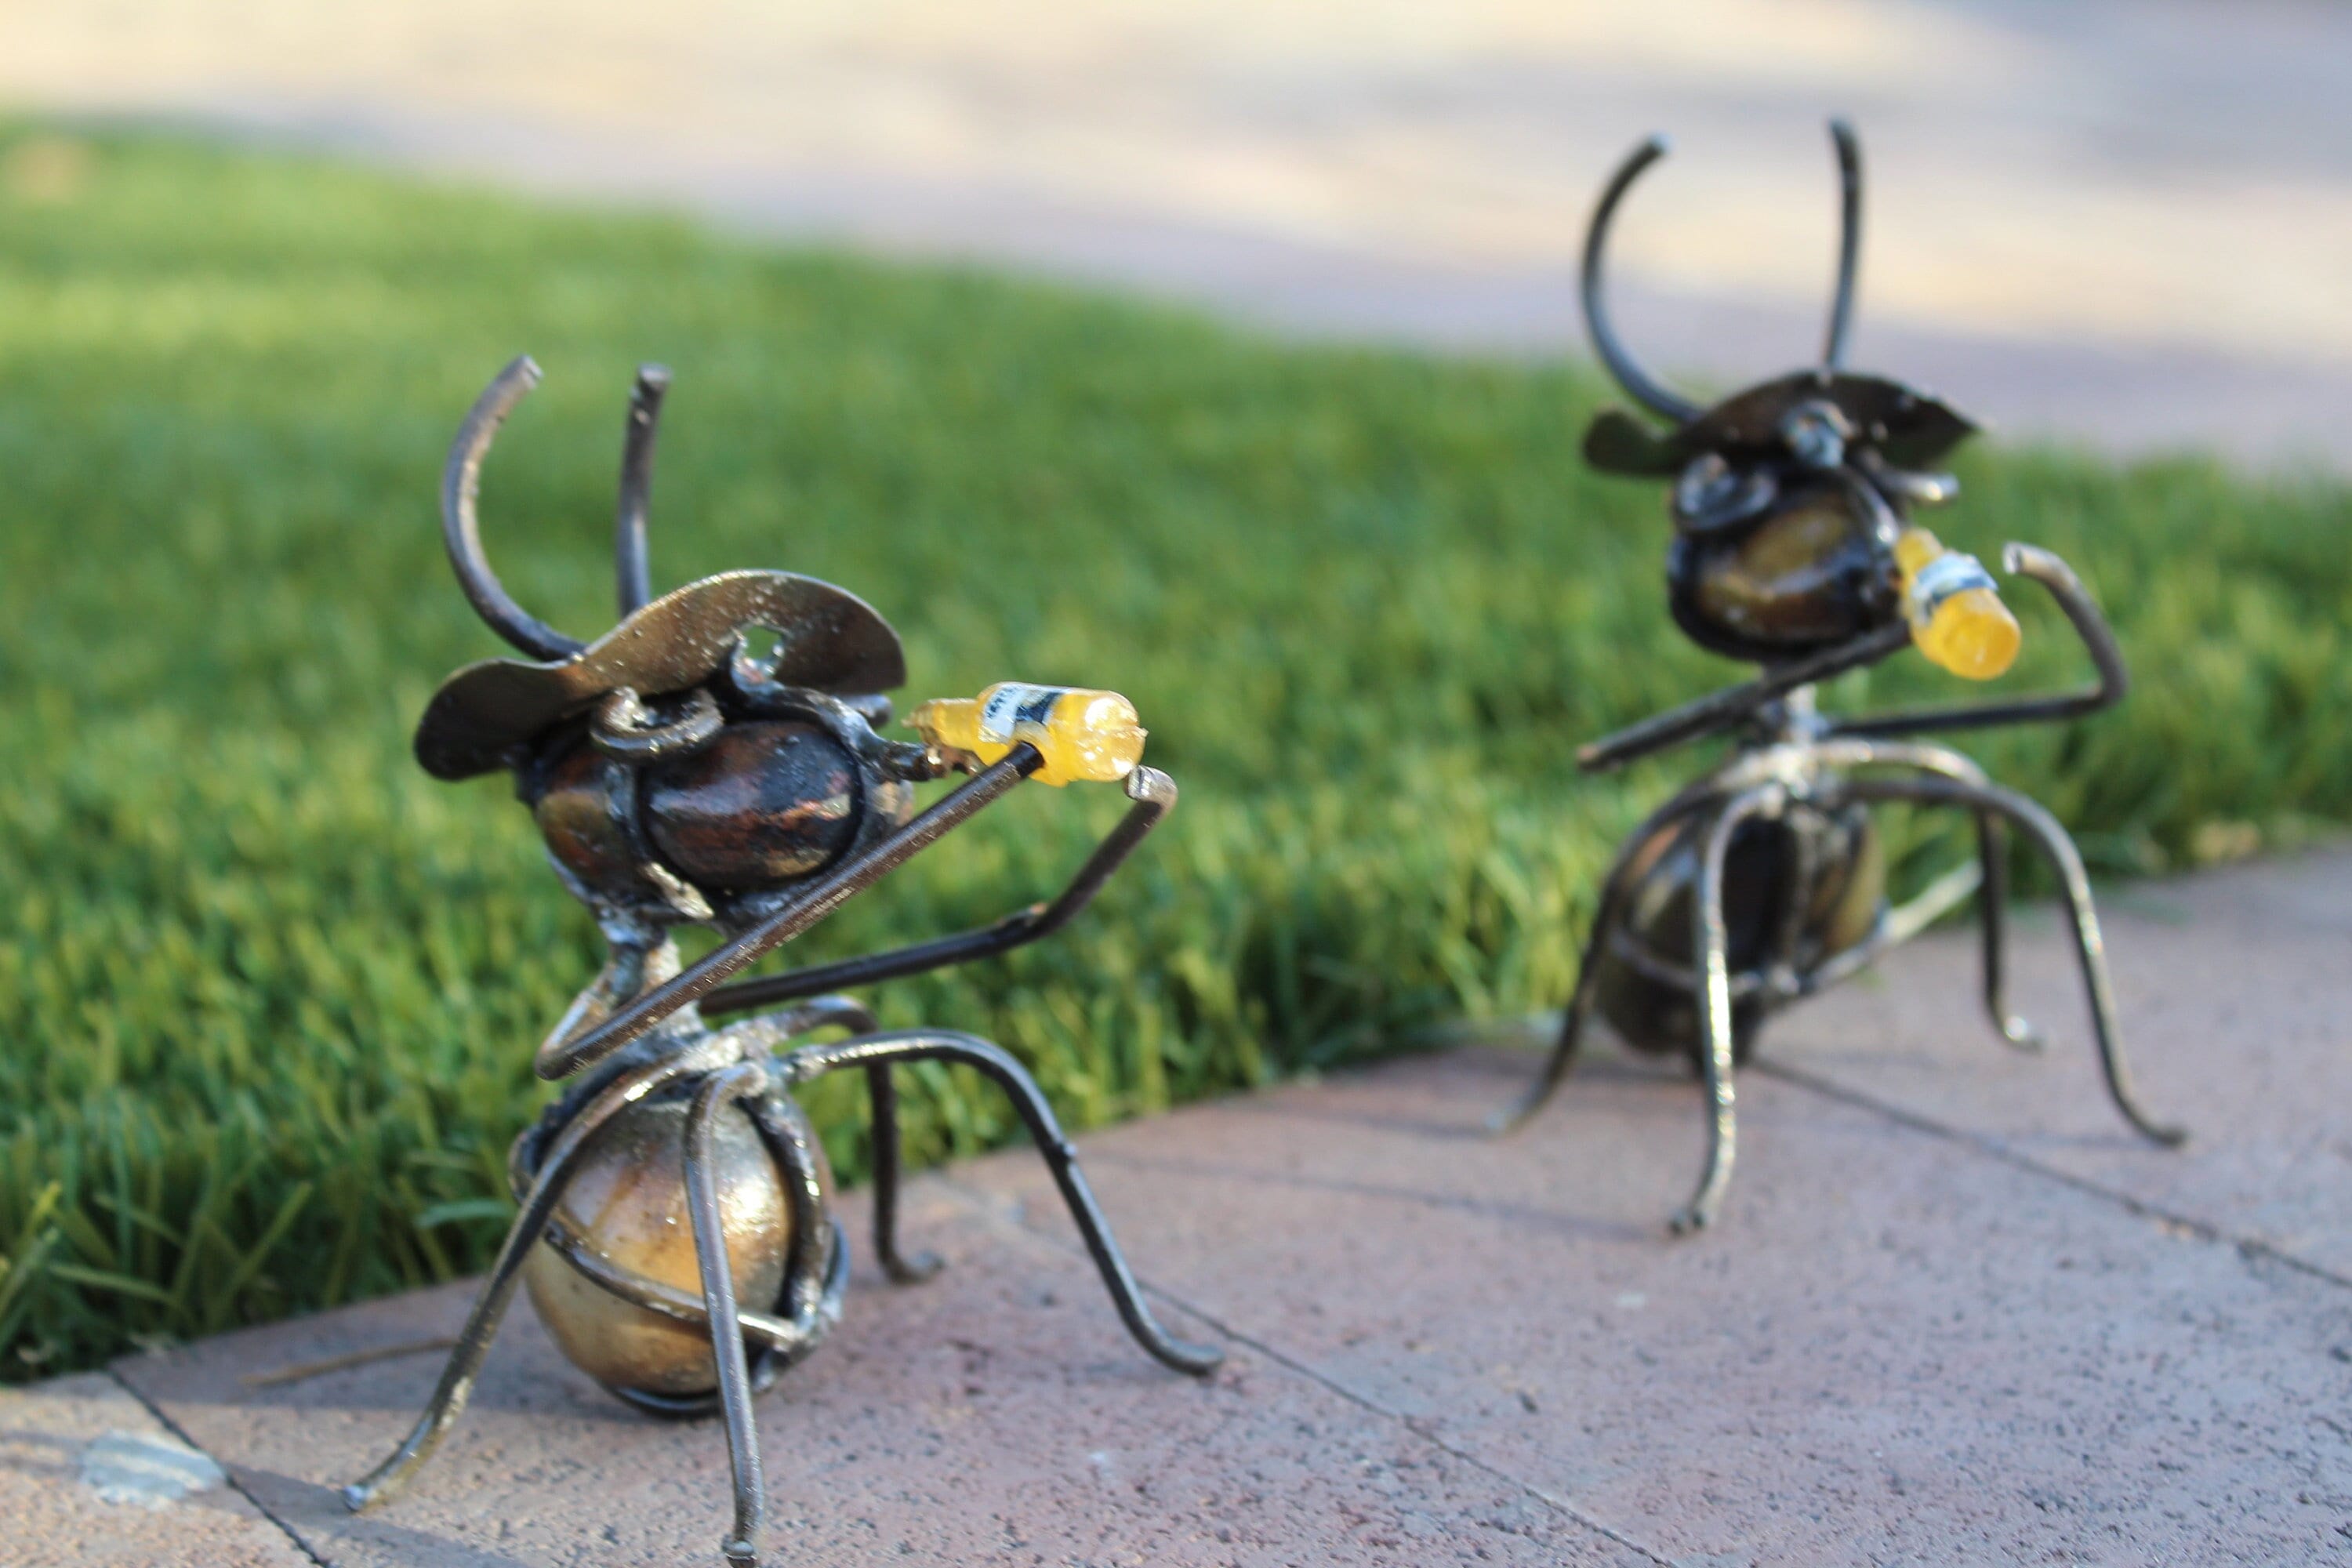 Dropship 1pc/4pcs, Metal Crafts Creative Ant, Ant Metal Sculpture, Garden  Ant Decor, Wall Hanging Decor, Garden Lawn Decor, Indoor Decor, Outdoor  Colorful Decor, Cute Insect Sculpture, Yard Decor to Sell Online at